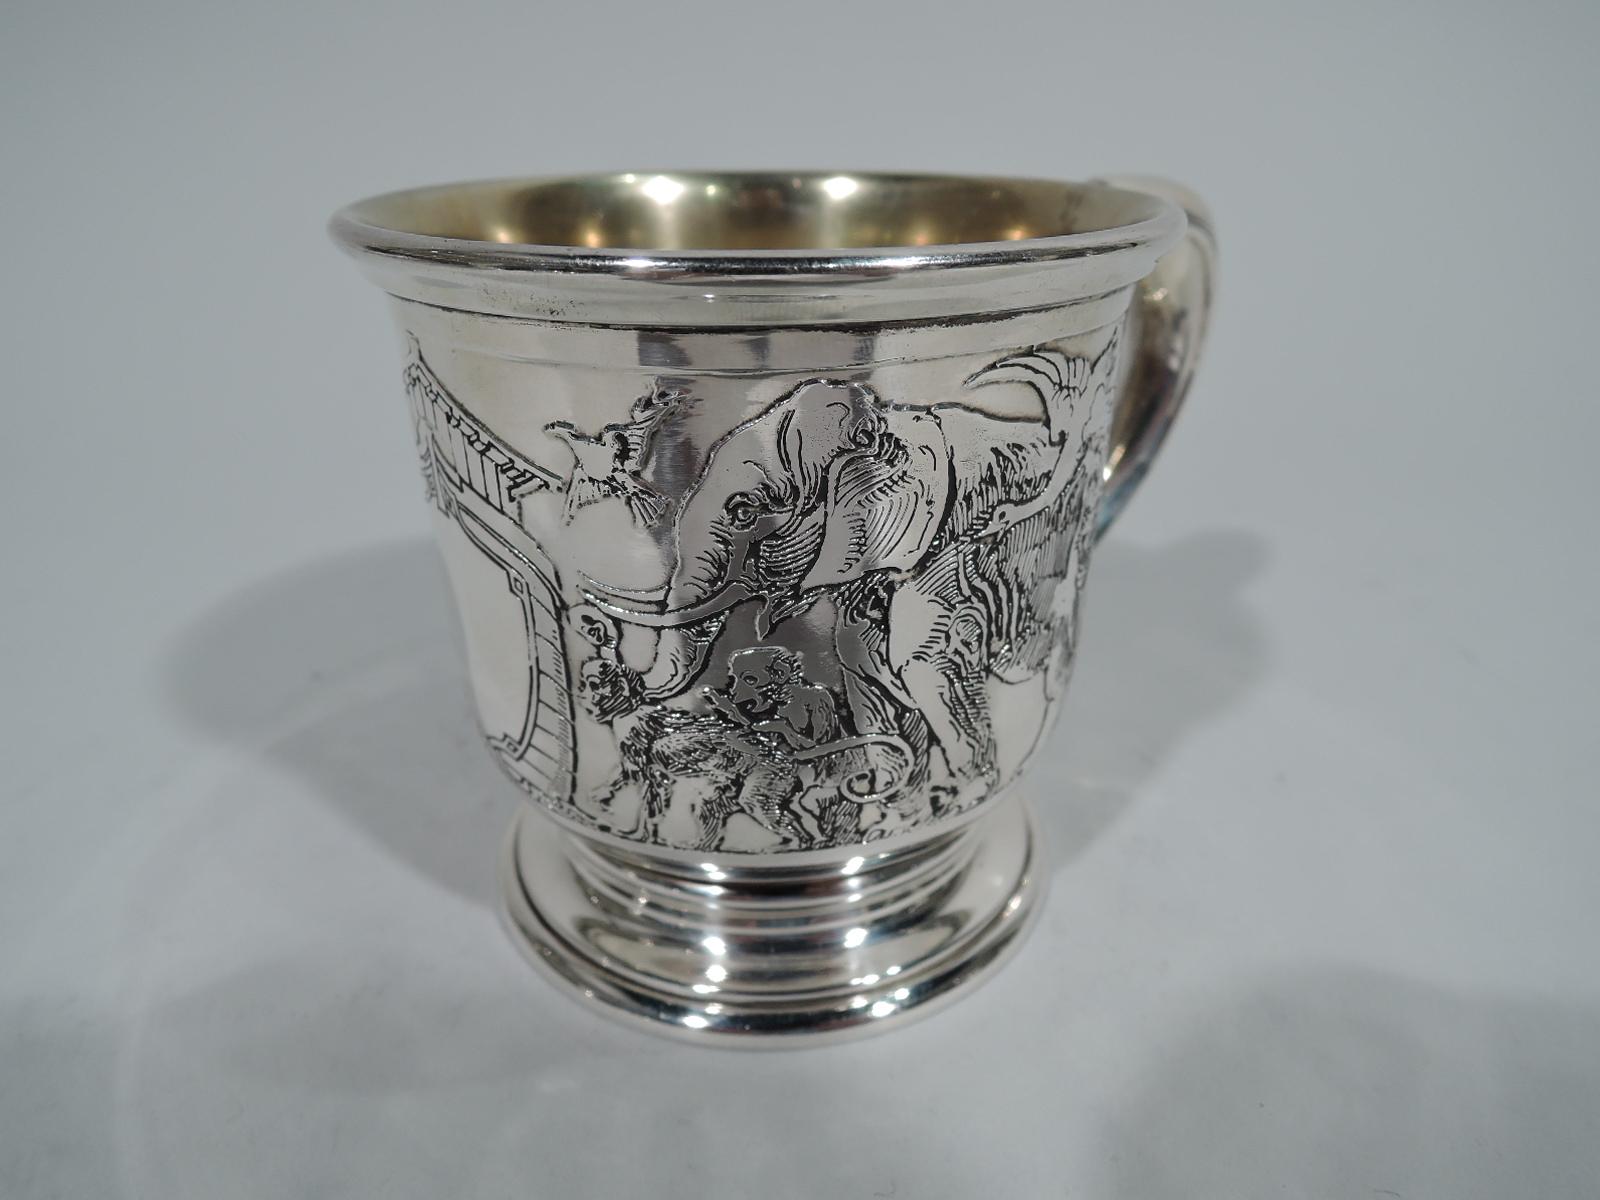 Edwardian sterling silver baby cup with Noah’s Ark theme. Made by Kerr in Newark, circa 1900. Flared rim, scrolled bracket handle, and stepped foot. The Ark is flanked by foxes, cats, elephants, and lions. A dense and lively frieze – less an orderly